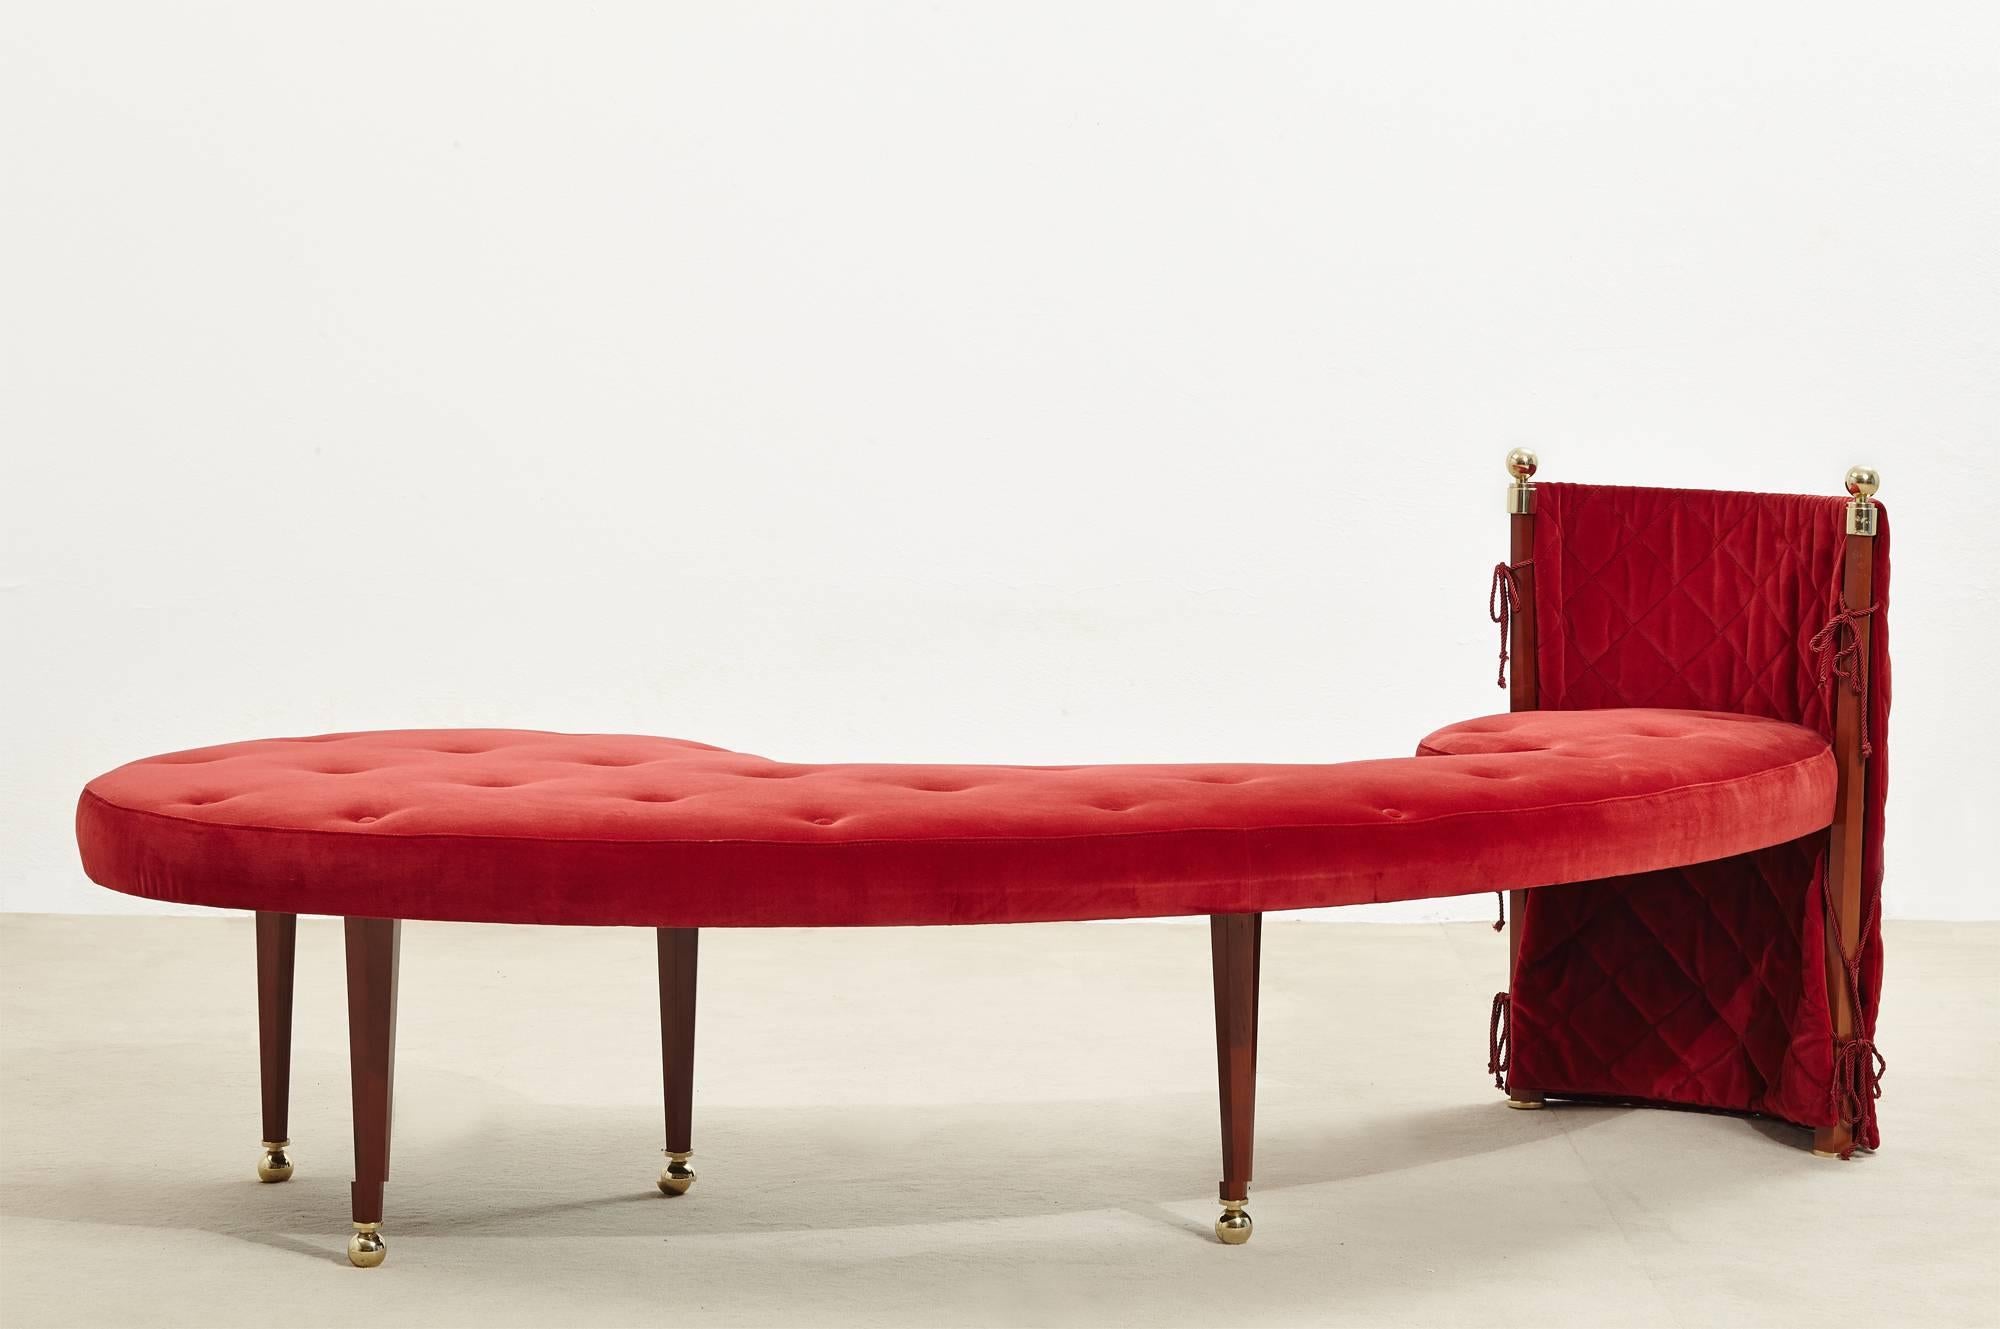 Italian Three-Seat Red Velvet Bench by Jeannot Cerutti for Sawaya & Moroni, 1991 For Sale